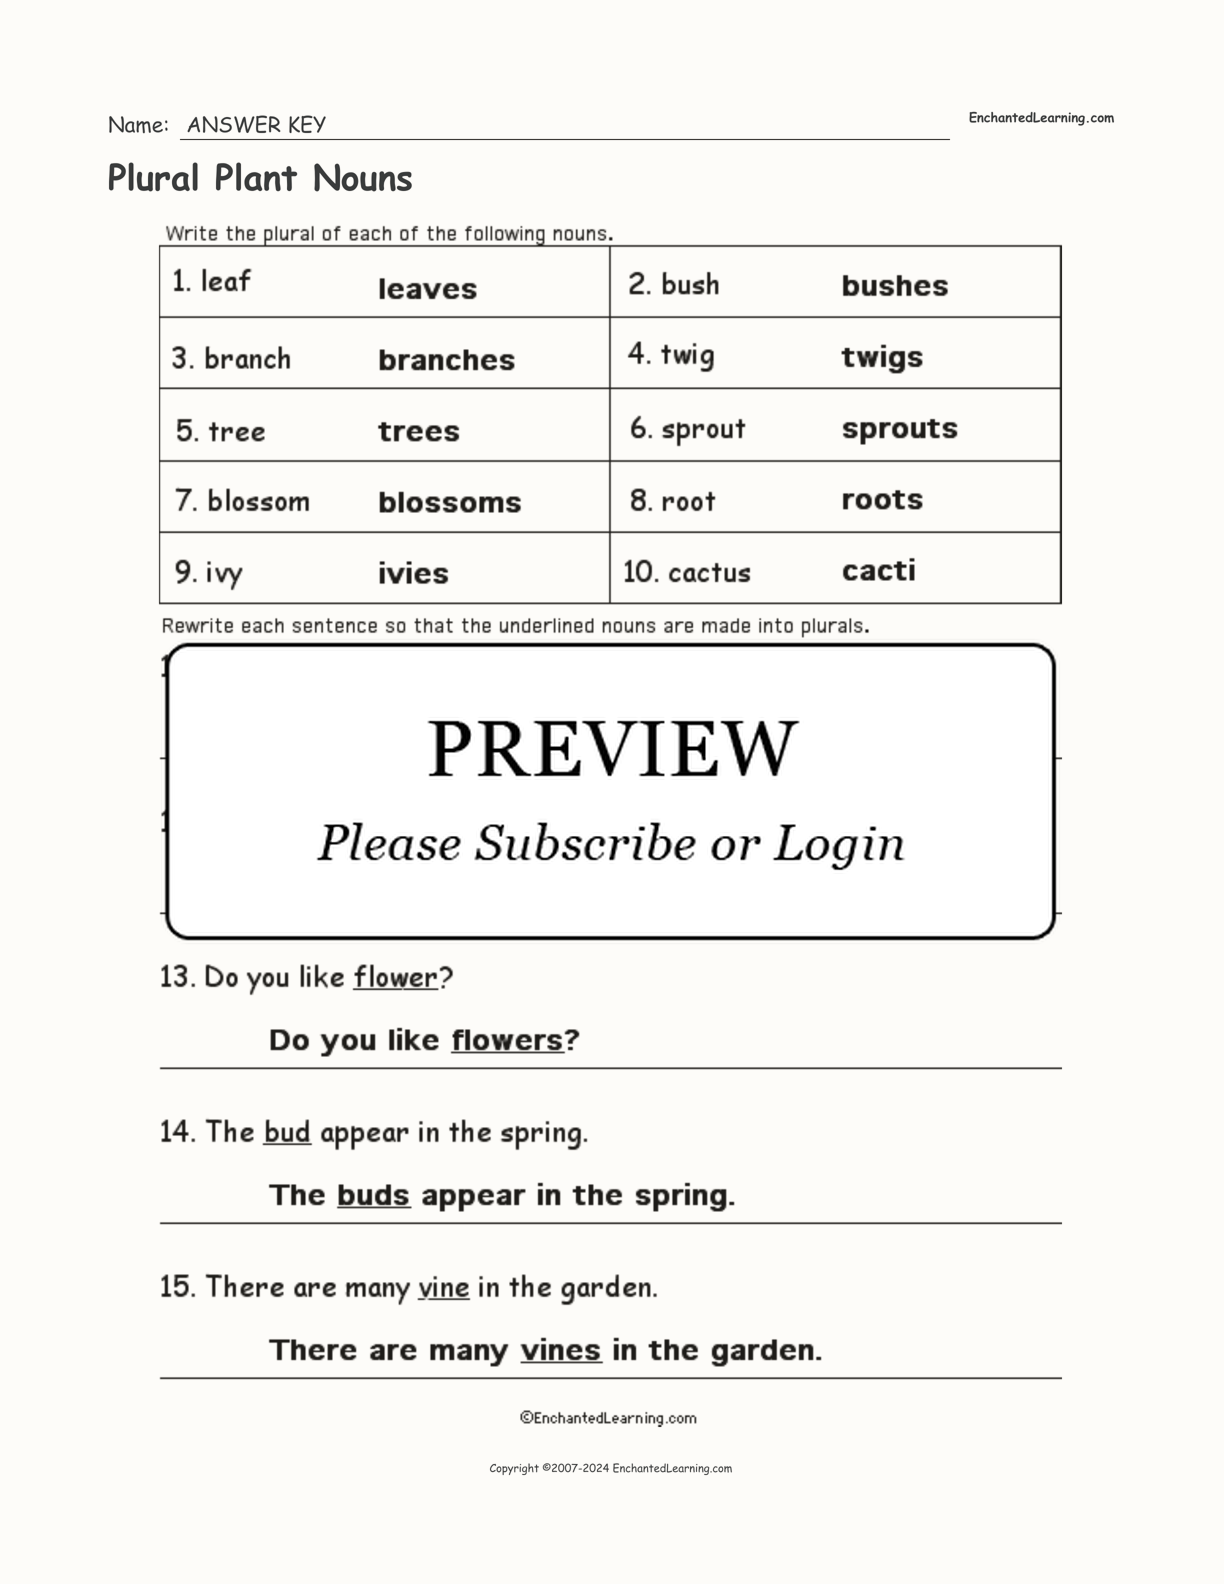 Plural Plant Nouns interactive worksheet page 2